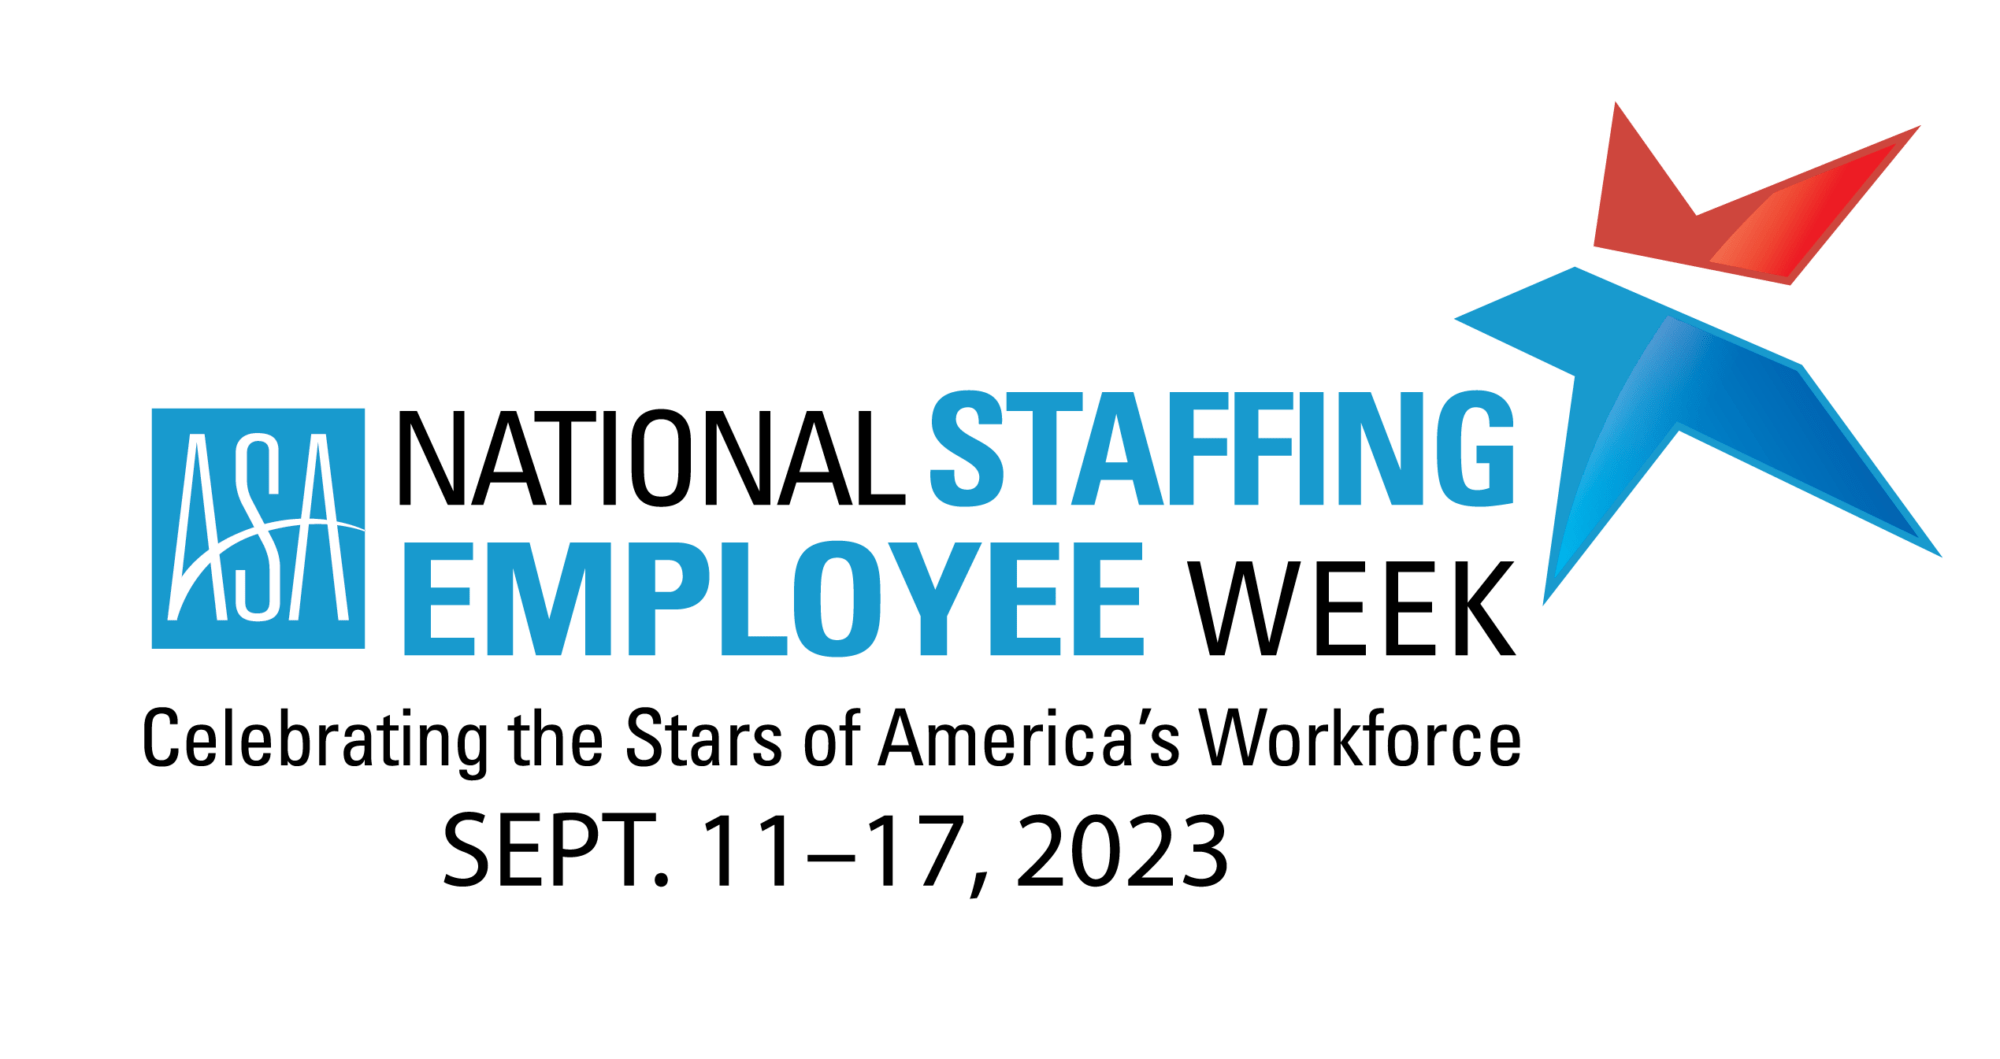 National Staffing Employee Week Logo - Celebrating the Stars of America's Workforce with the dates Sept 11-17, 2023